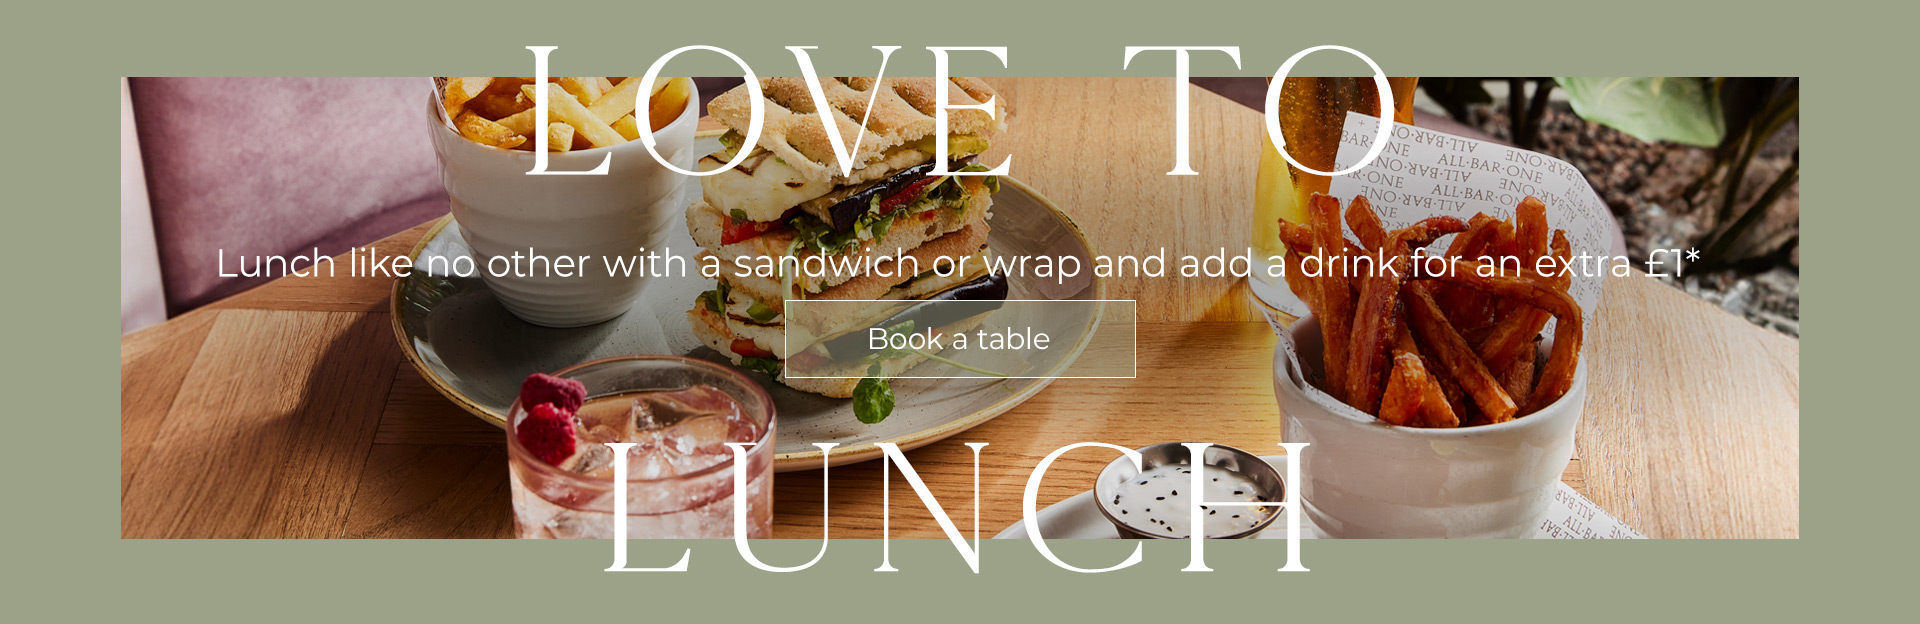 Lunch Offer at All Bar One Butlers Wharf